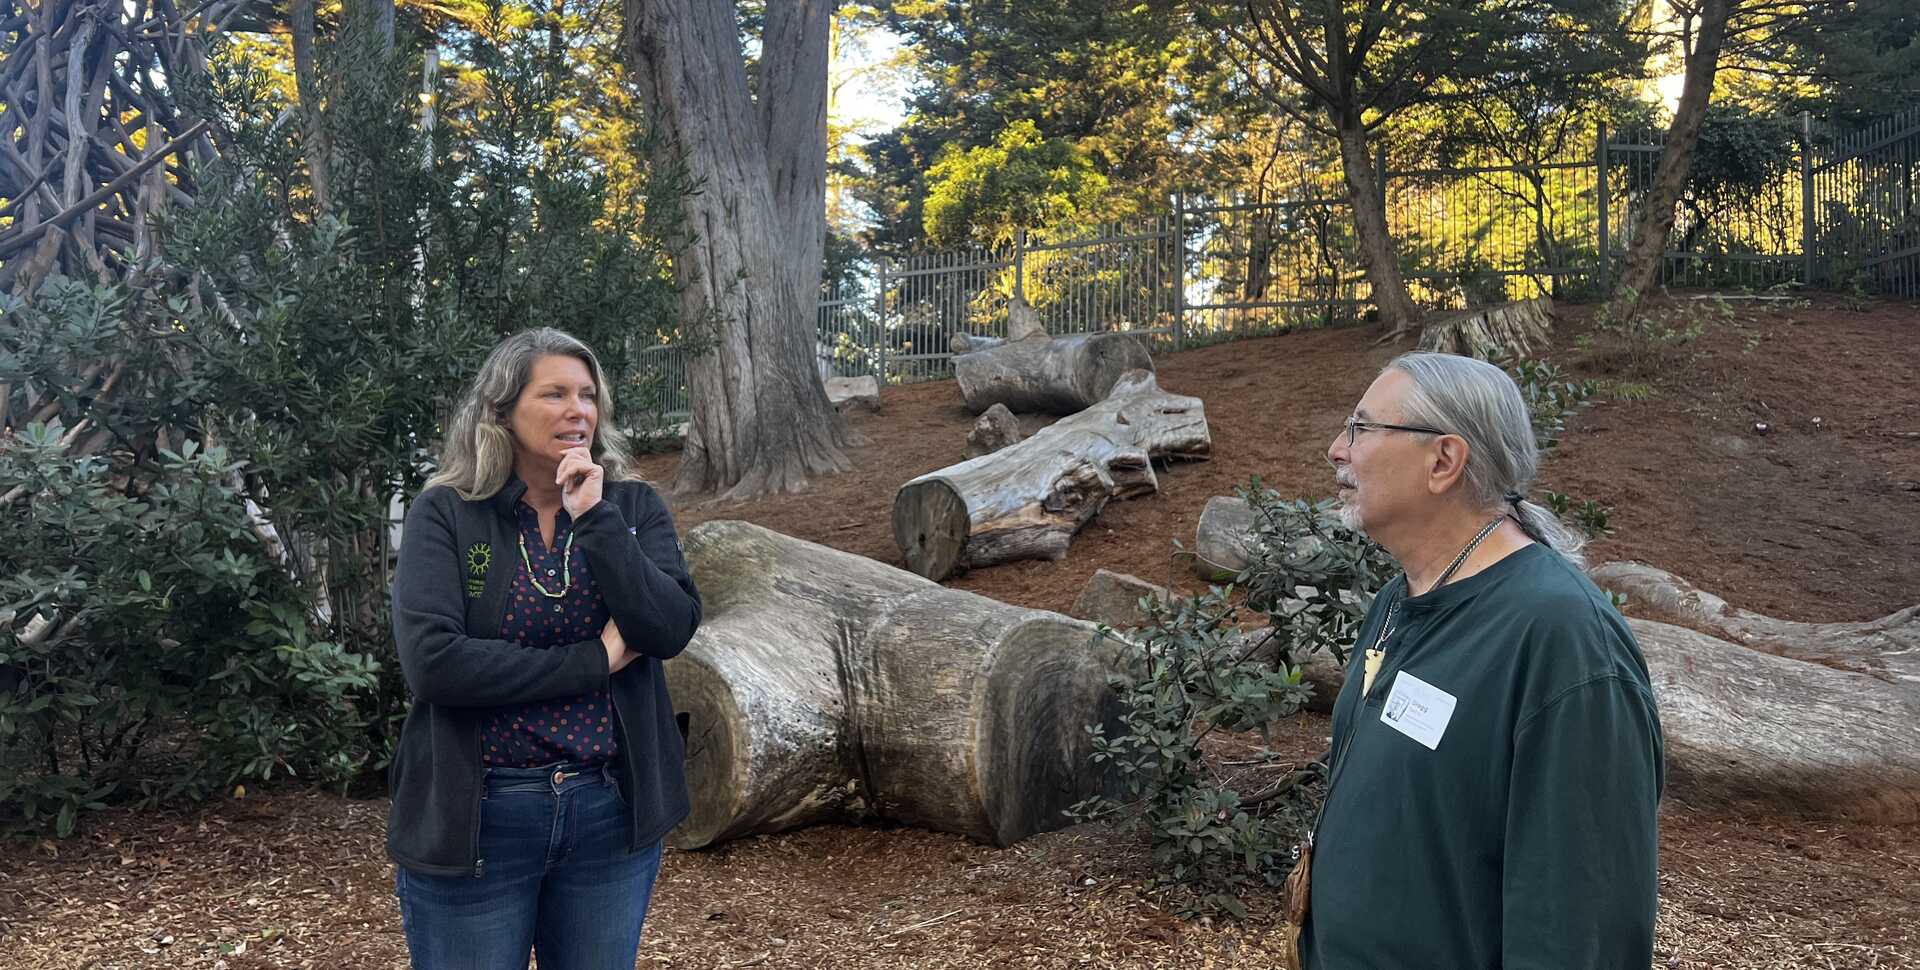 Shannon Tushingham and Gregg Castro are in discussion at Wander Woods, outside the academy in front of tree logs.